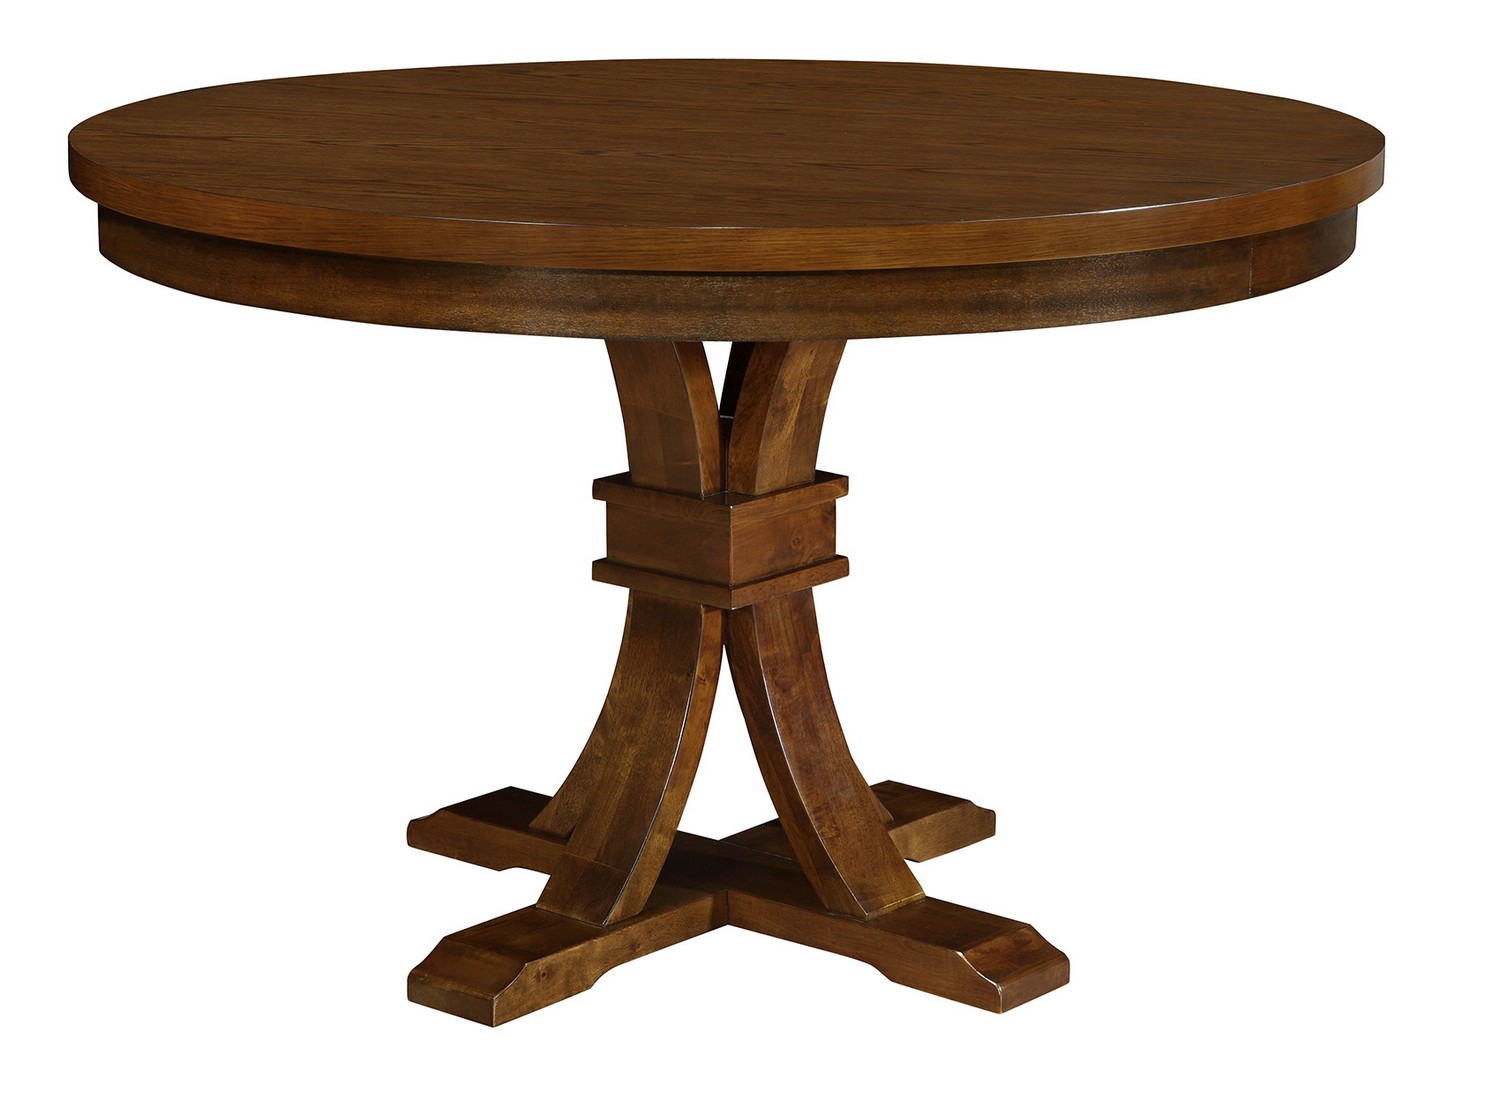 Coaster Abrams Round Dining Table - Truffle